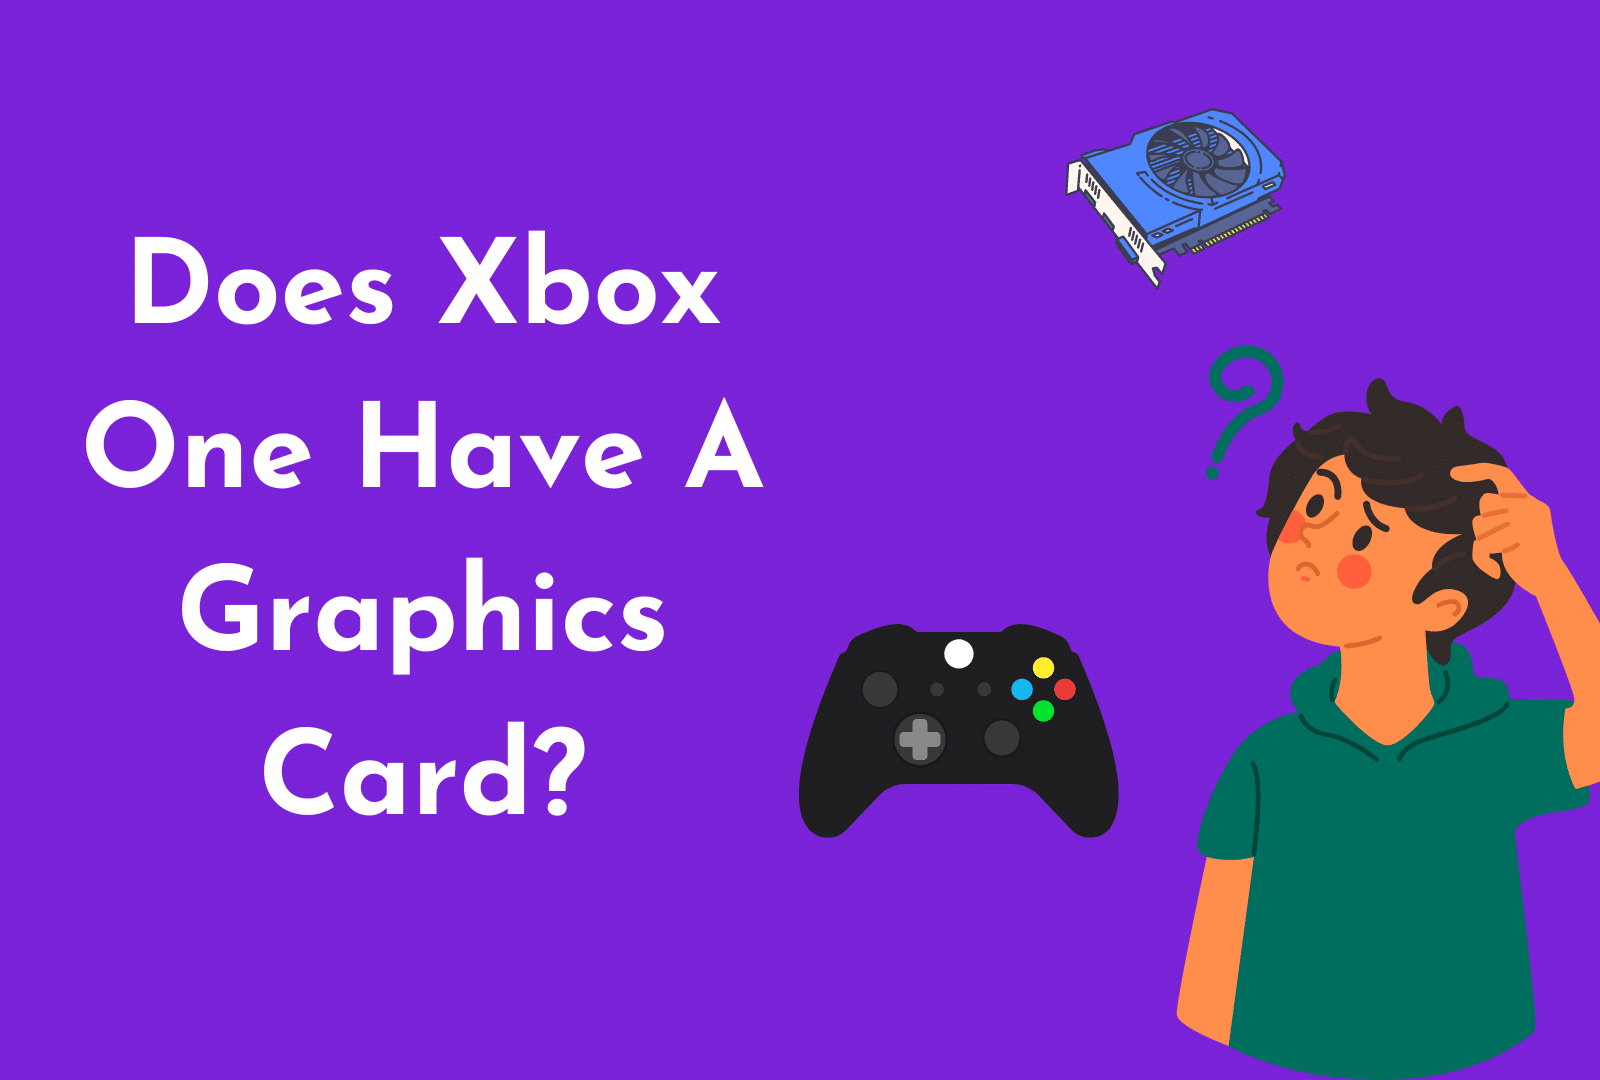 C:\Users\lenovo\Downloads\Does Xbox One Have A Graphics Card.png